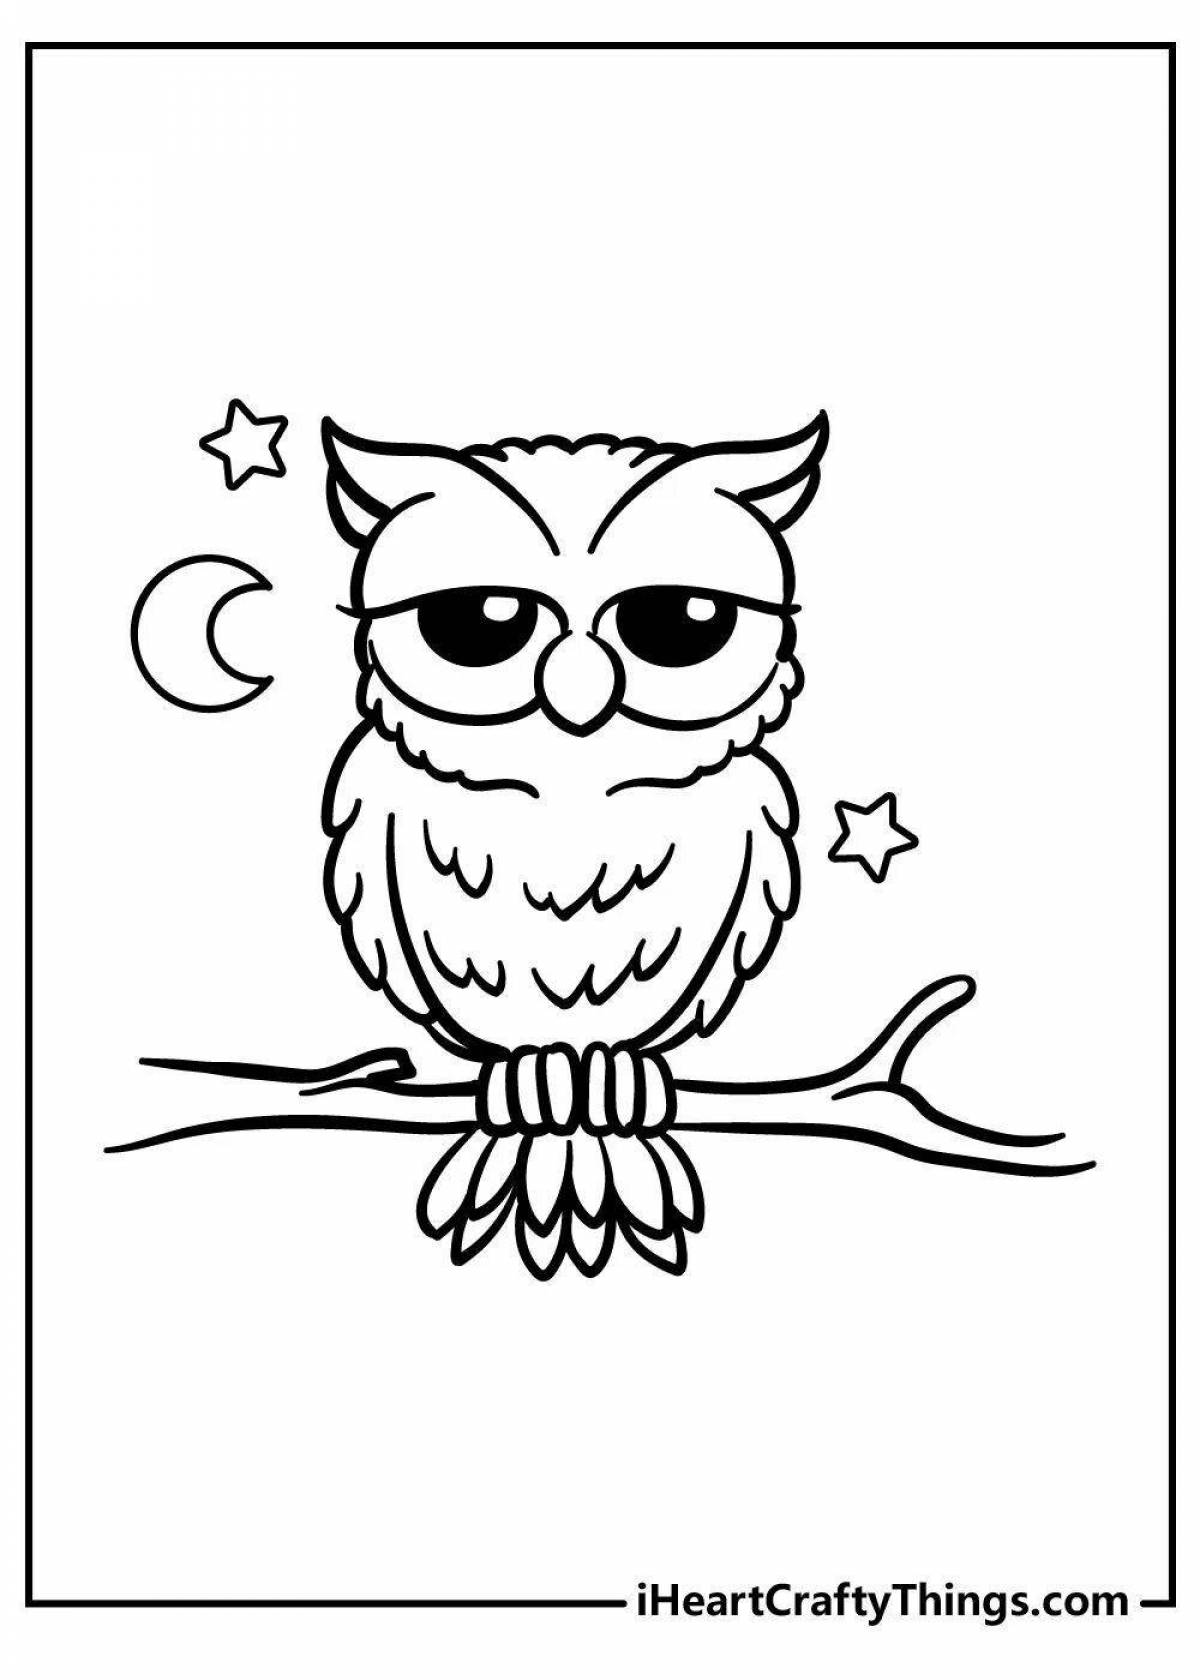 Bright owl coloring book for children 6-7 years old